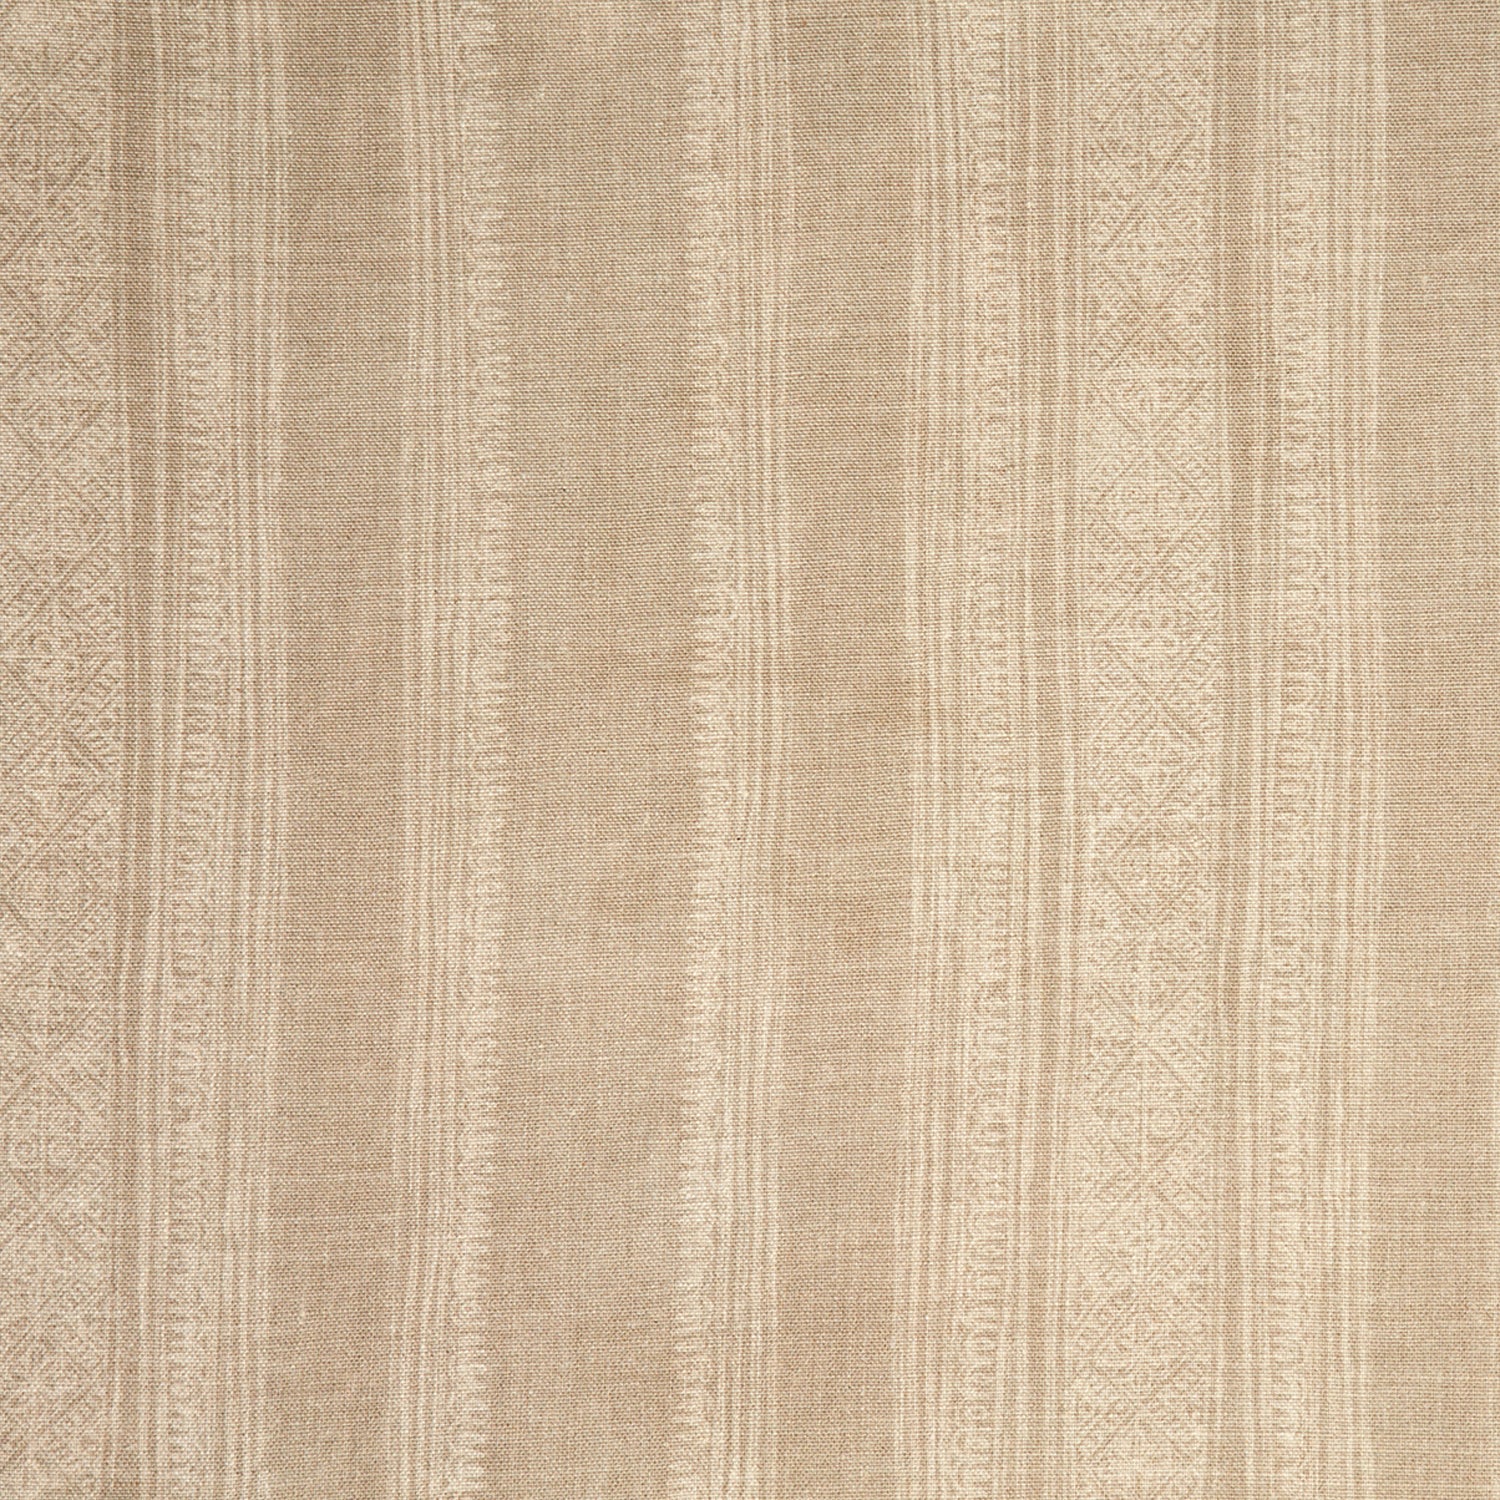 Woven fabric swatch in a striped pattern of intricate white lines over a washed beige background.